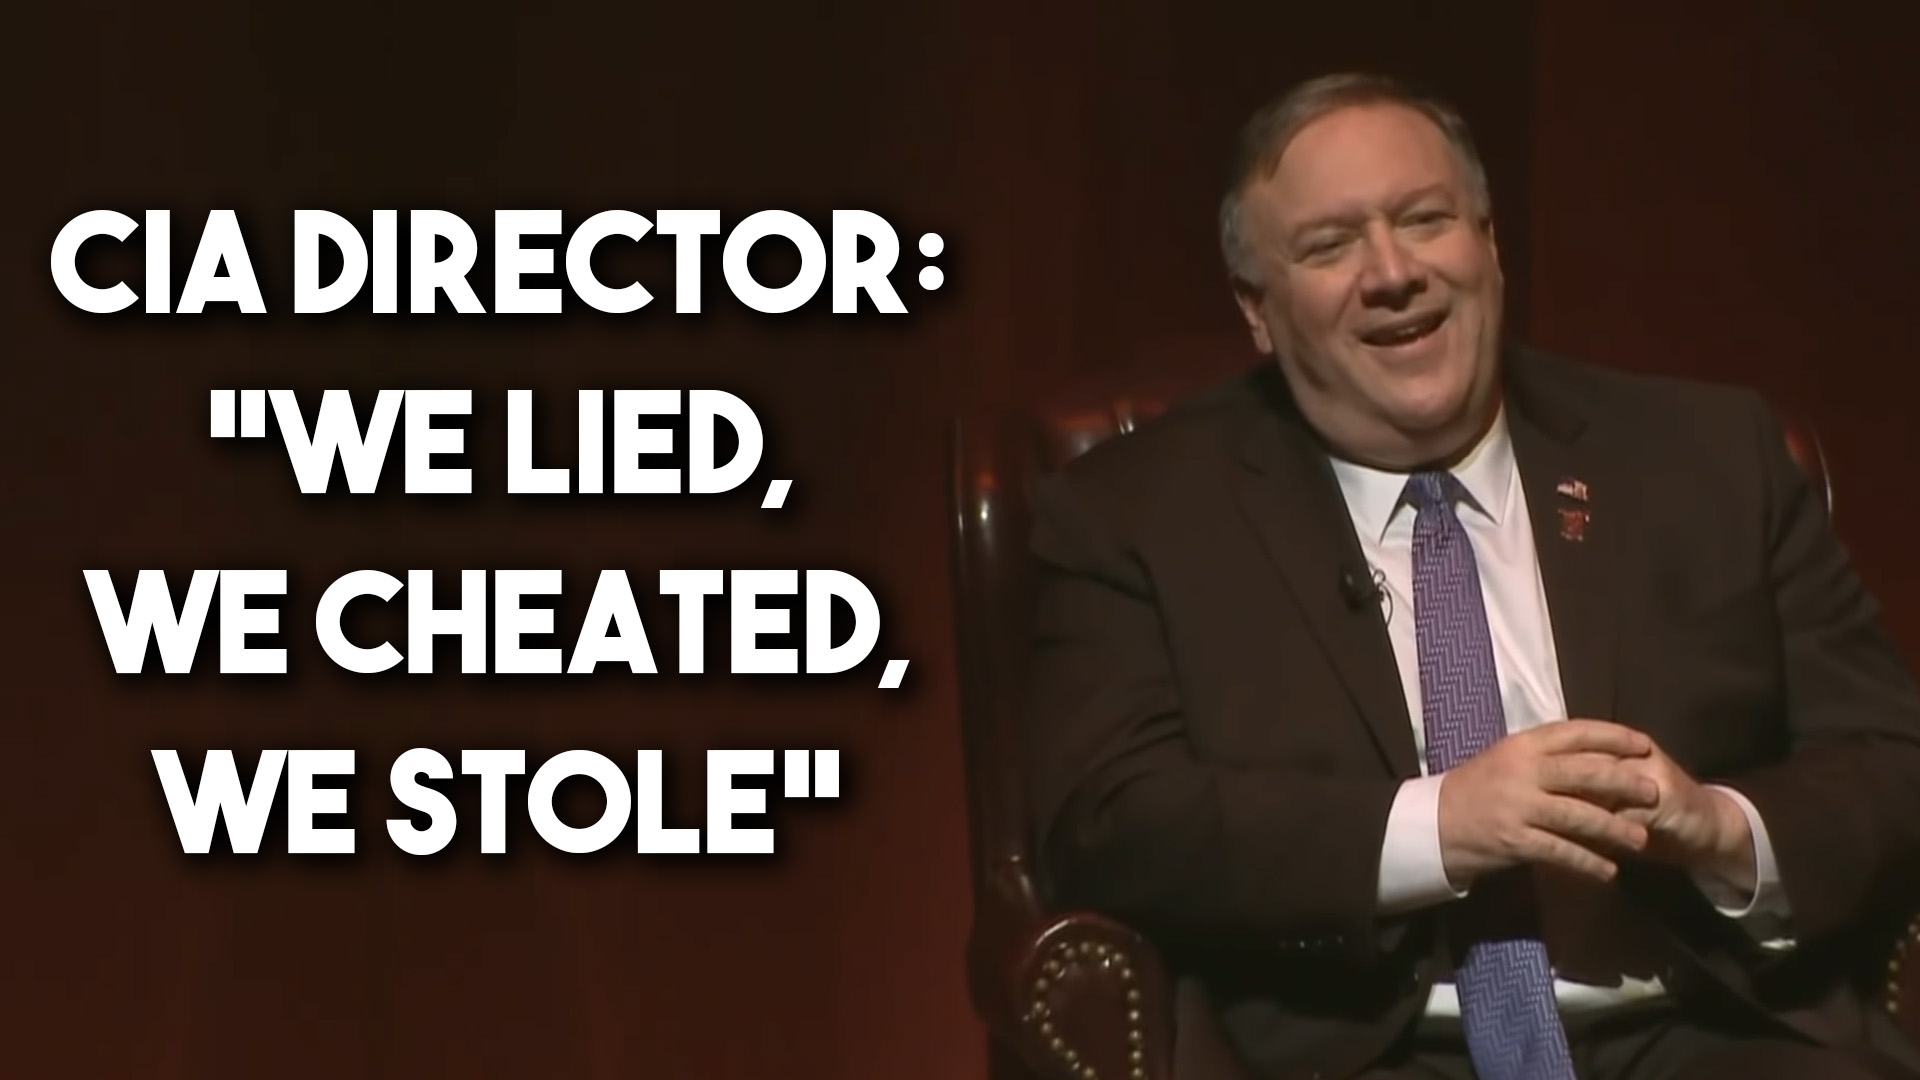 Pompeo-CIA-lied-cheated-stole.jpg